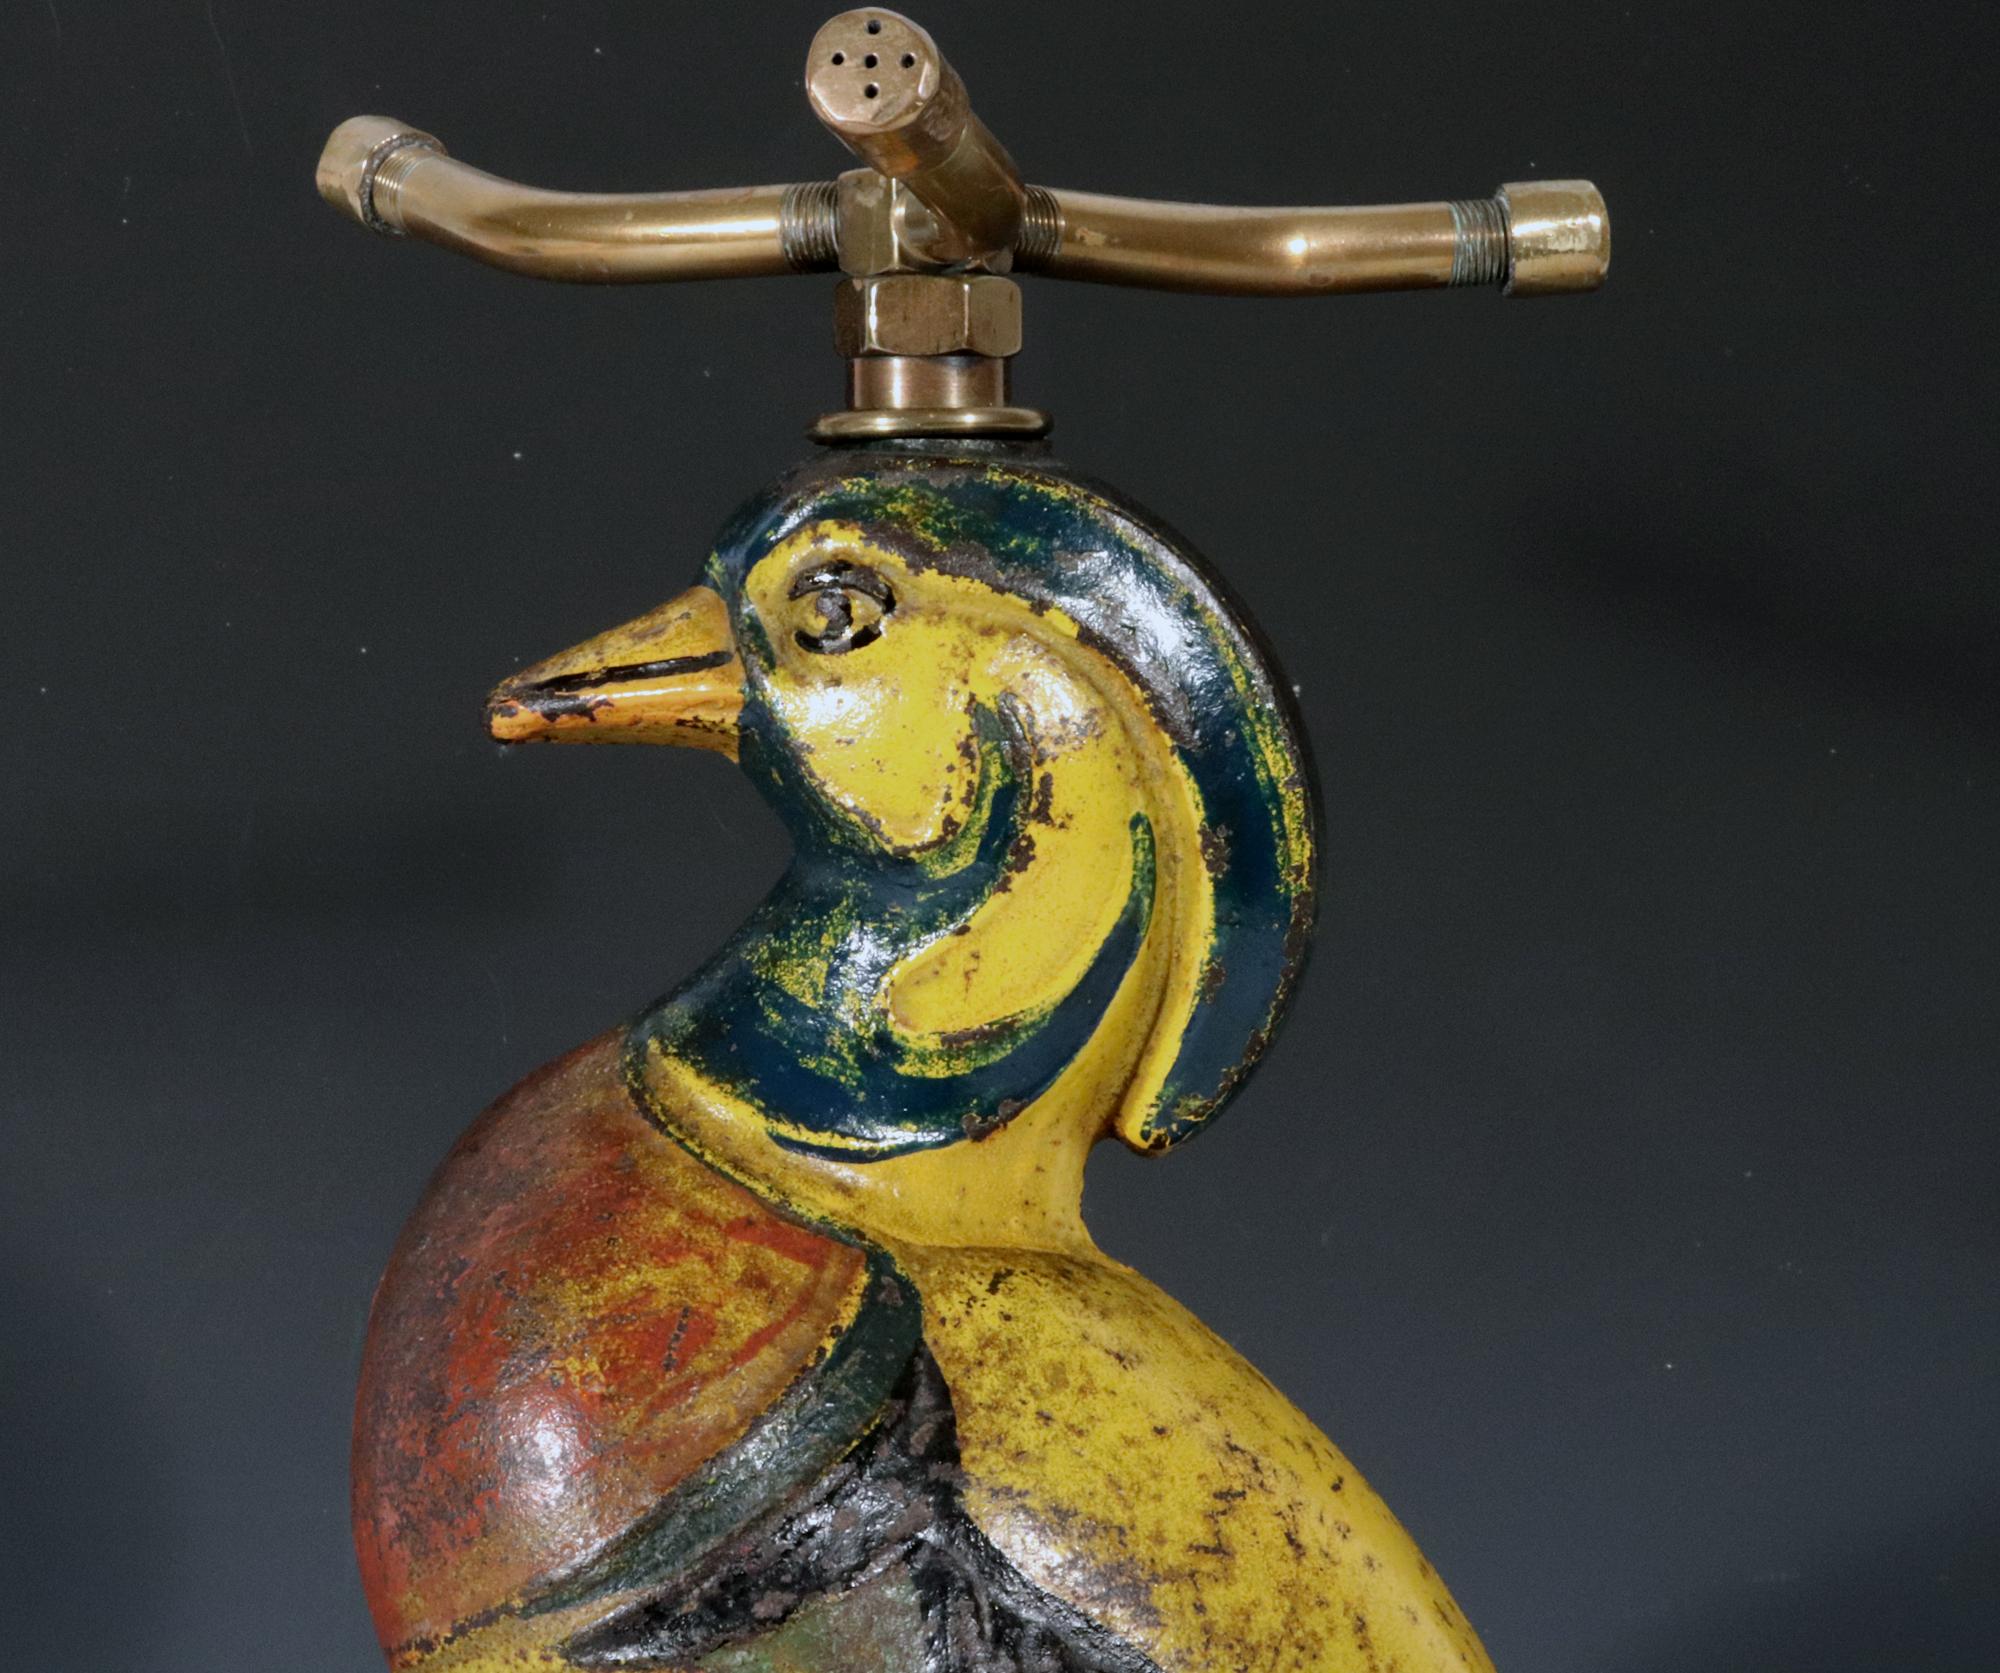 Vintage Cast Iron Lawn Sprinkler,
Sitting Wood Duck,
Nuydea Foundry,
1920s-1930s

The cast iron early lawn sprinkler is in the form of a wood duck sitting on an upturned clam shell with original brass fittings- intake and three arm sprinkler